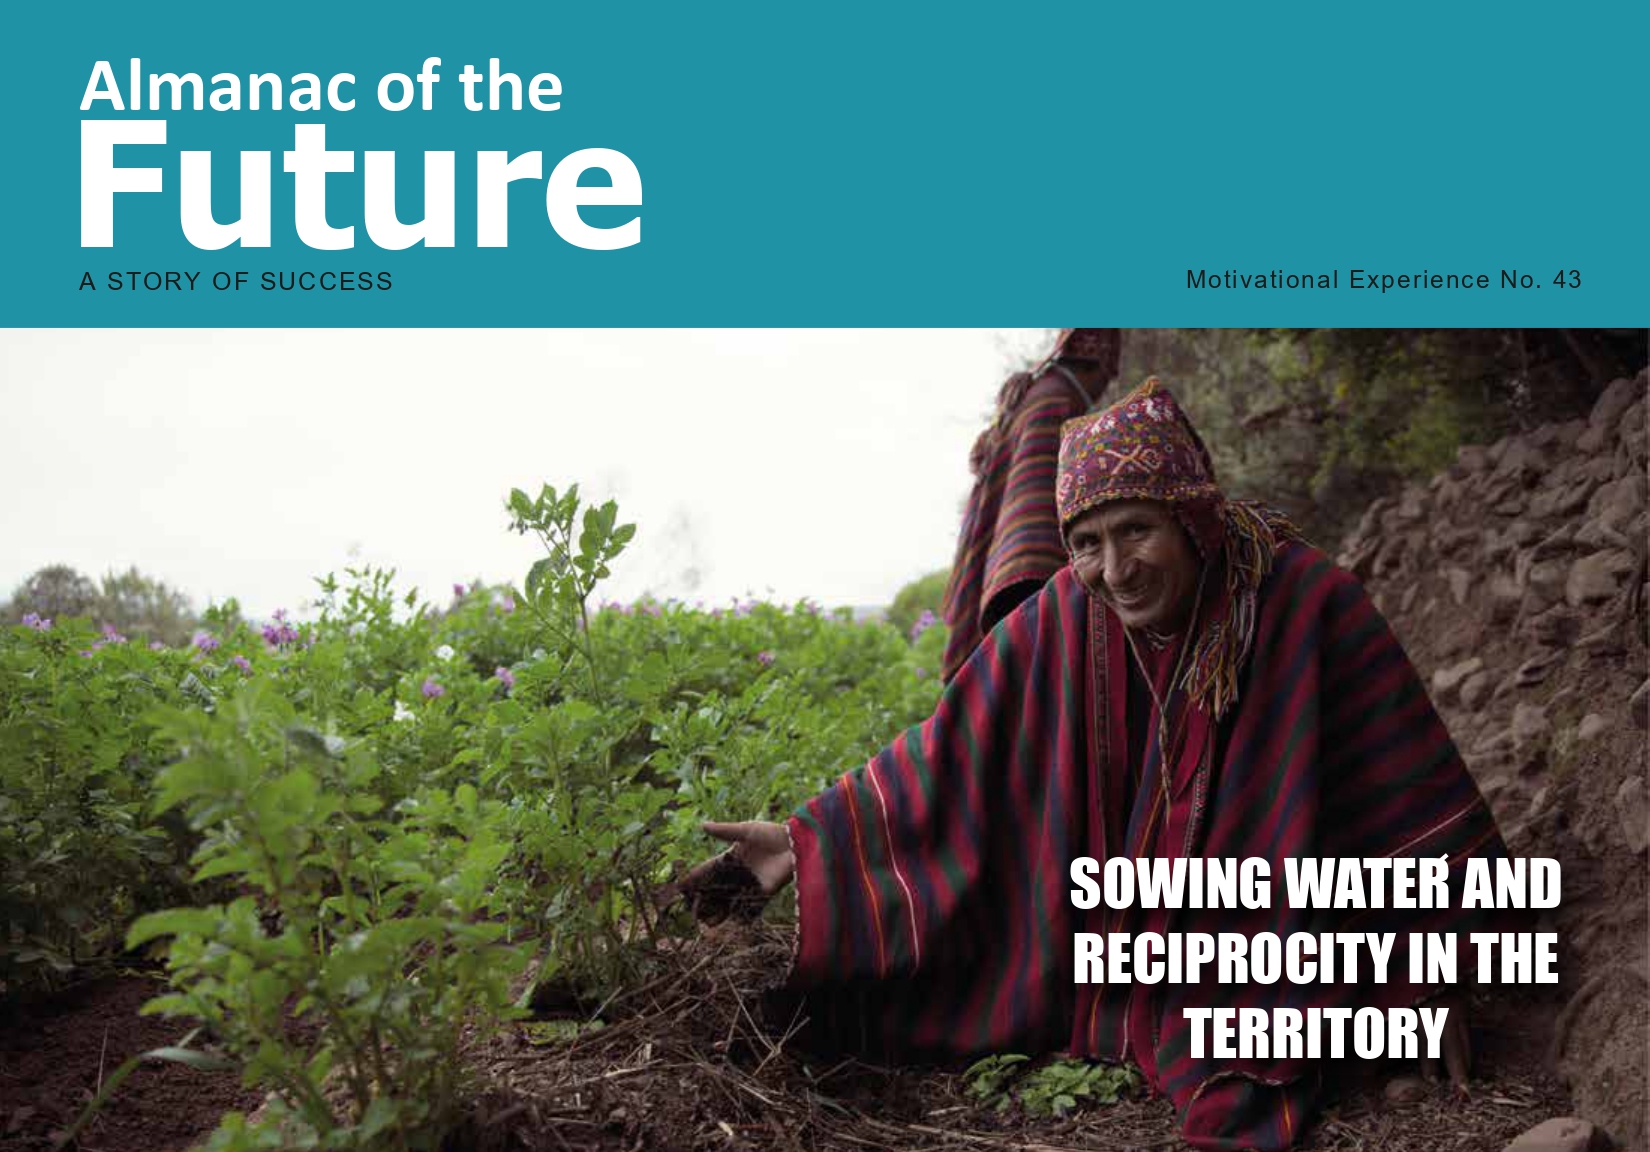 SOWING WATER AND RECIPROCITY IN THE TERRITORY